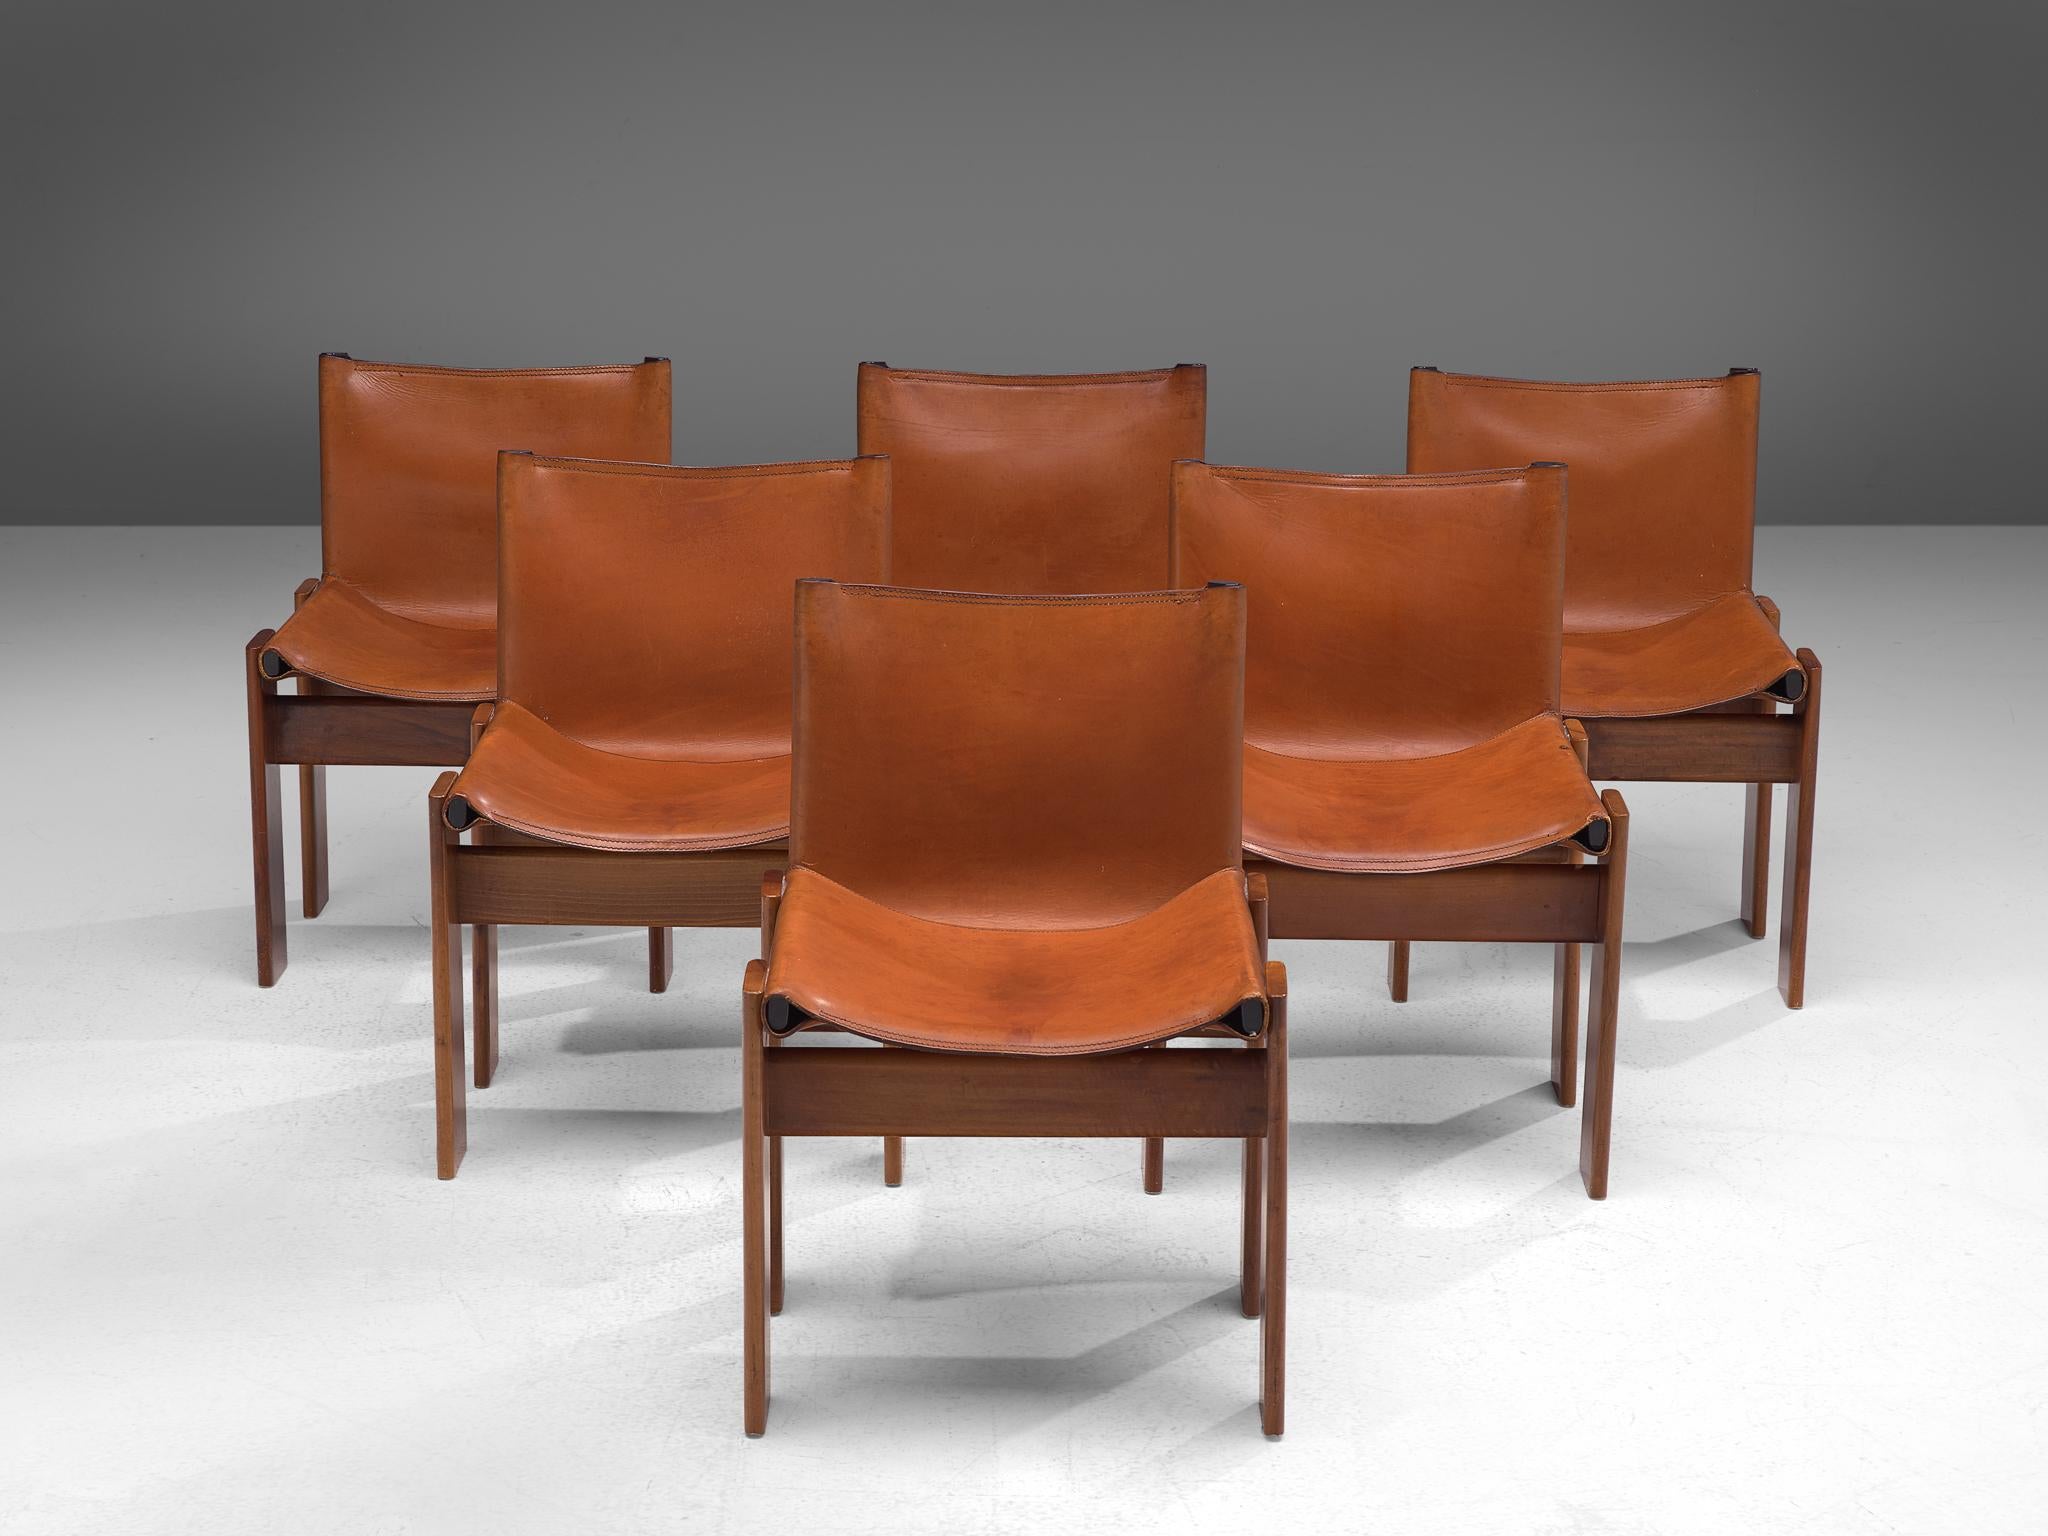 Afra & Tobia Scarpa, monk dining chairs, wood and patinated cognac leather, Italy, 1974.

The wonderfully patinated cognac leather forms a striking combination with the dark walnut wood. Interesting is the 'flat' shape of this chair where the